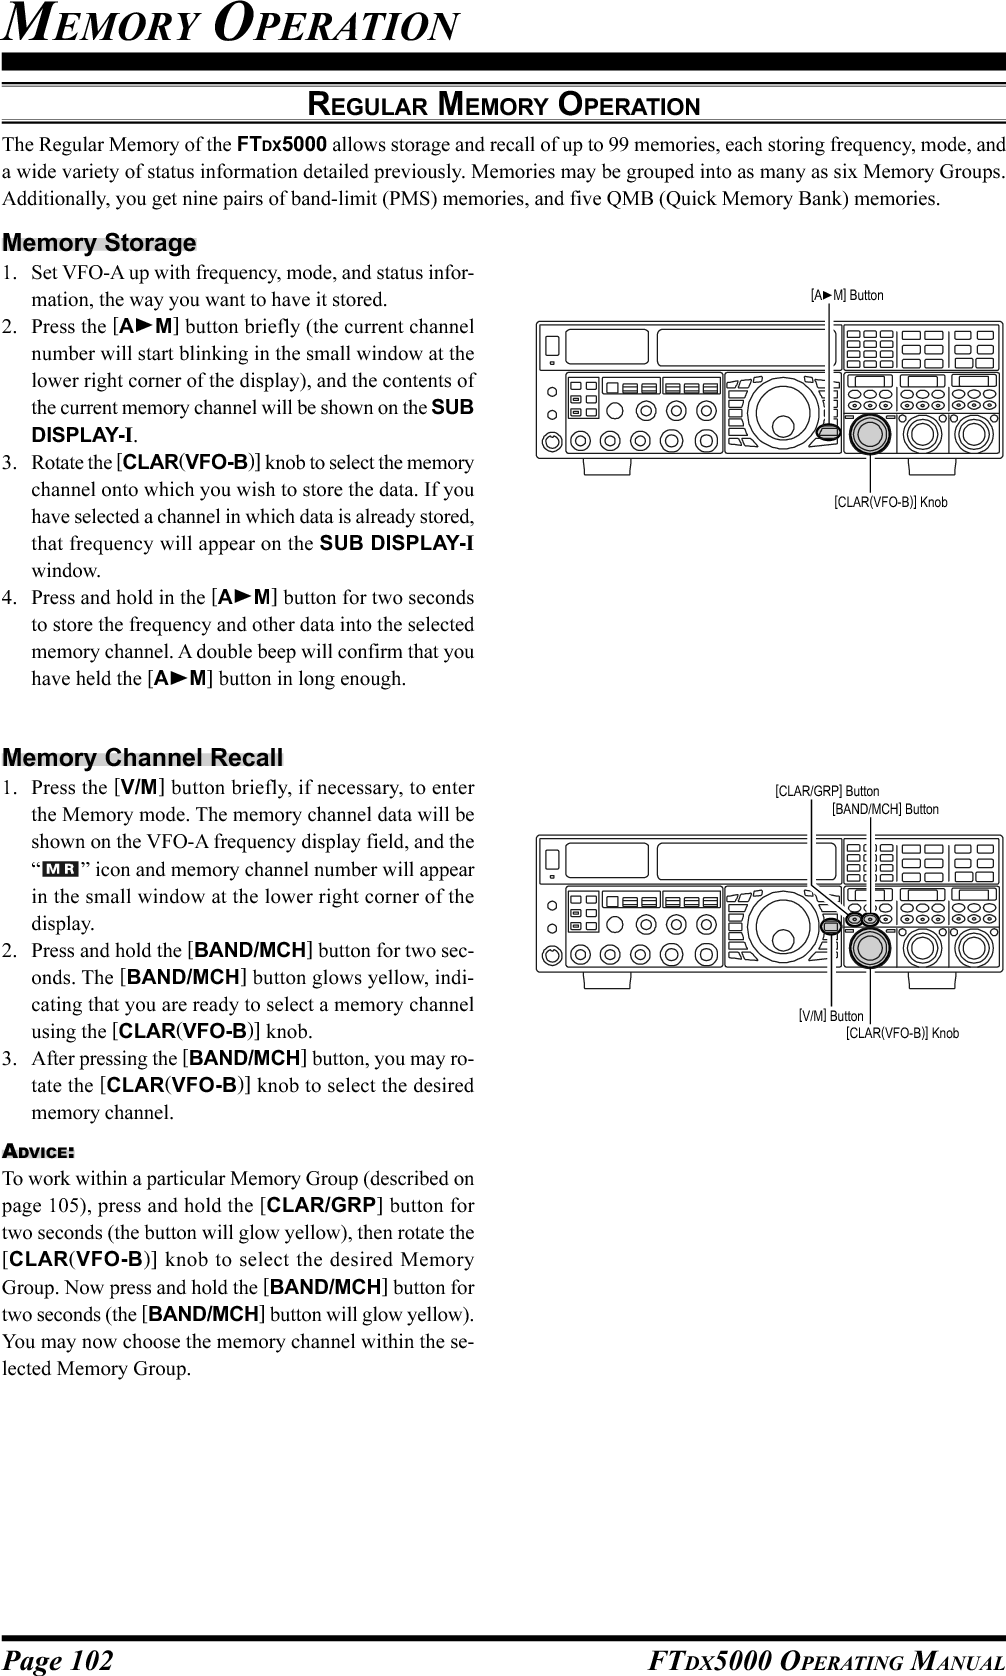 Page 102 FTDX5000 OPERATING MANUALMEMORY OPERATIONREGULAR MEMORY OPERATIONThe Regular Memory of the FTDX5000 allows storage and recall of up to 99 memories, each storing frequency, mode, anda wide variety of status information detailed previously. Memories may be grouped into as many as six Memory Groups.Additionally, you get nine pairs of band-limit (PMS) memories, and five QMB (Quick Memory Bank) memories.Memory Storage1. Set VFO-A up with frequency, mode, and status infor-mation, the way you want to have it stored.2. Press the [AM] button briefly (the current channelnumber will start blinking in the small window at thelower right corner of the display), and the contents ofthe current memory channel will be shown on the SUBDISPLAY-I.3. Rotate the [CLAR(VFO-B)] knob to select the memorychannel onto which you wish to store the data. If youhave selected a channel in which data is already stored,that frequency will appear on the SUB DISPLAY-Iwindow.4. Press and hold in the [AM] button for two secondsto store the frequency and other data into the selectedmemory channel. A double beep will confirm that youhave held the [AM] button in long enough.Memory Channel Recall1. Press the [V/M] button briefly, if necessary, to enterthe Memory mode. The memory channel data will beshown on the VFO-A frequency display field, and the“” icon and memory channel number will appearin the small window at the lower right corner of thedisplay.2. Press and hold the [BAND/MCH] button for two sec-onds. The [BAND/MCH] button glows yellow, indi-cating that you are ready to select a memory channelusing the [CLAR(VFO-B)] knob.3. After pressing the [BAND/MCH] button, you may ro-tate the [CLAR(VFO-B)] knob to select the desiredmemory channel.ADVICE:To work within a particular Memory Group (described onpage 105), press and hold the [CLAR/GRP] button fortwo seconds (the button will glow yellow), then rotate the[CLAR(VFO-B)] knob to select the desired MemoryGroup. Now press and hold the [BAND/MCH] button fortwo seconds (the [BAND/MCH] button will glow yellow).You may now choose the memory channel within the se-lected Memory Group.[CLAR(VFO-B)] Knob[AM] Button[CLAR(VFO-B)] Knob[V/M] Button[BAND/MCH] Button[CLAR/GRP] Button